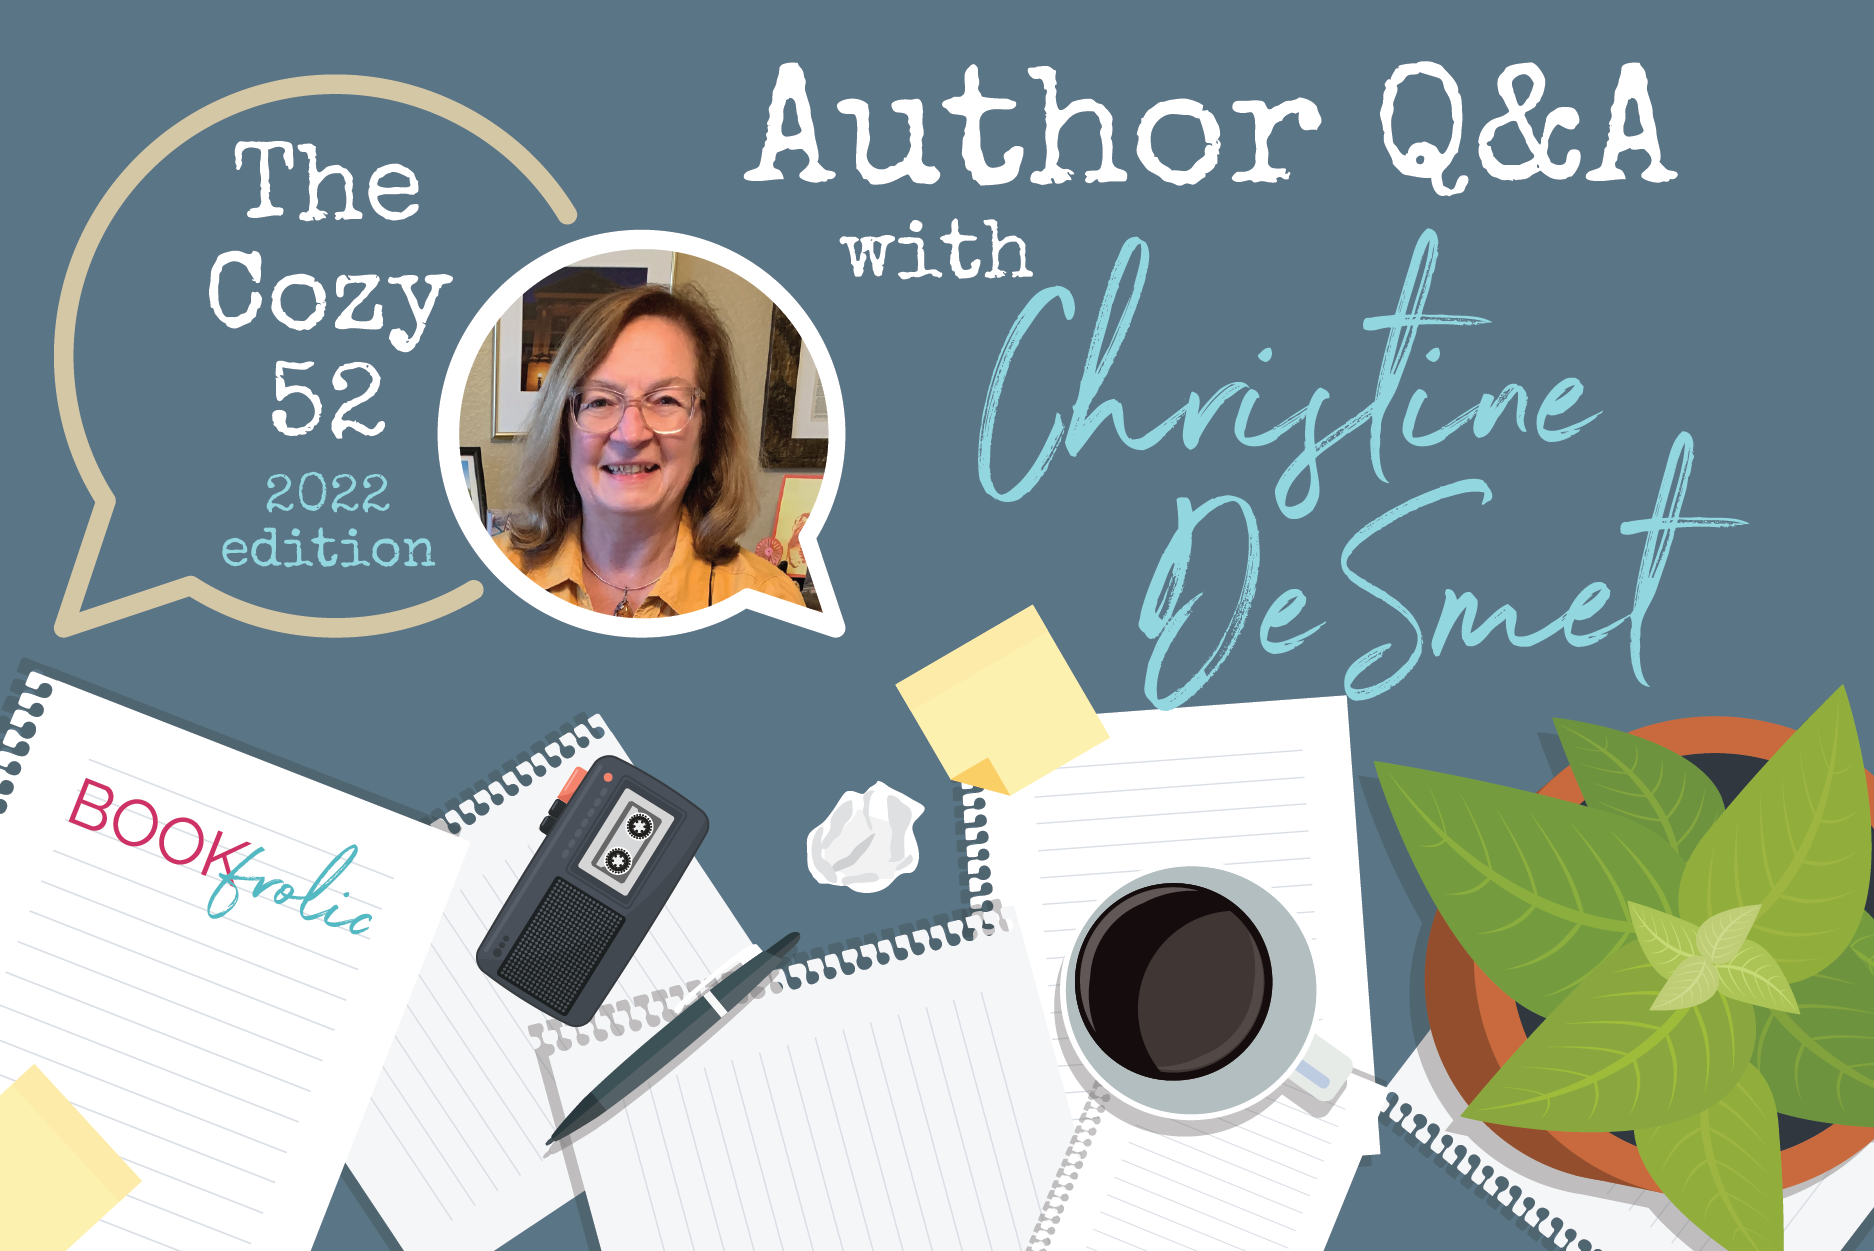 banner for author interview with Christine DeSmet